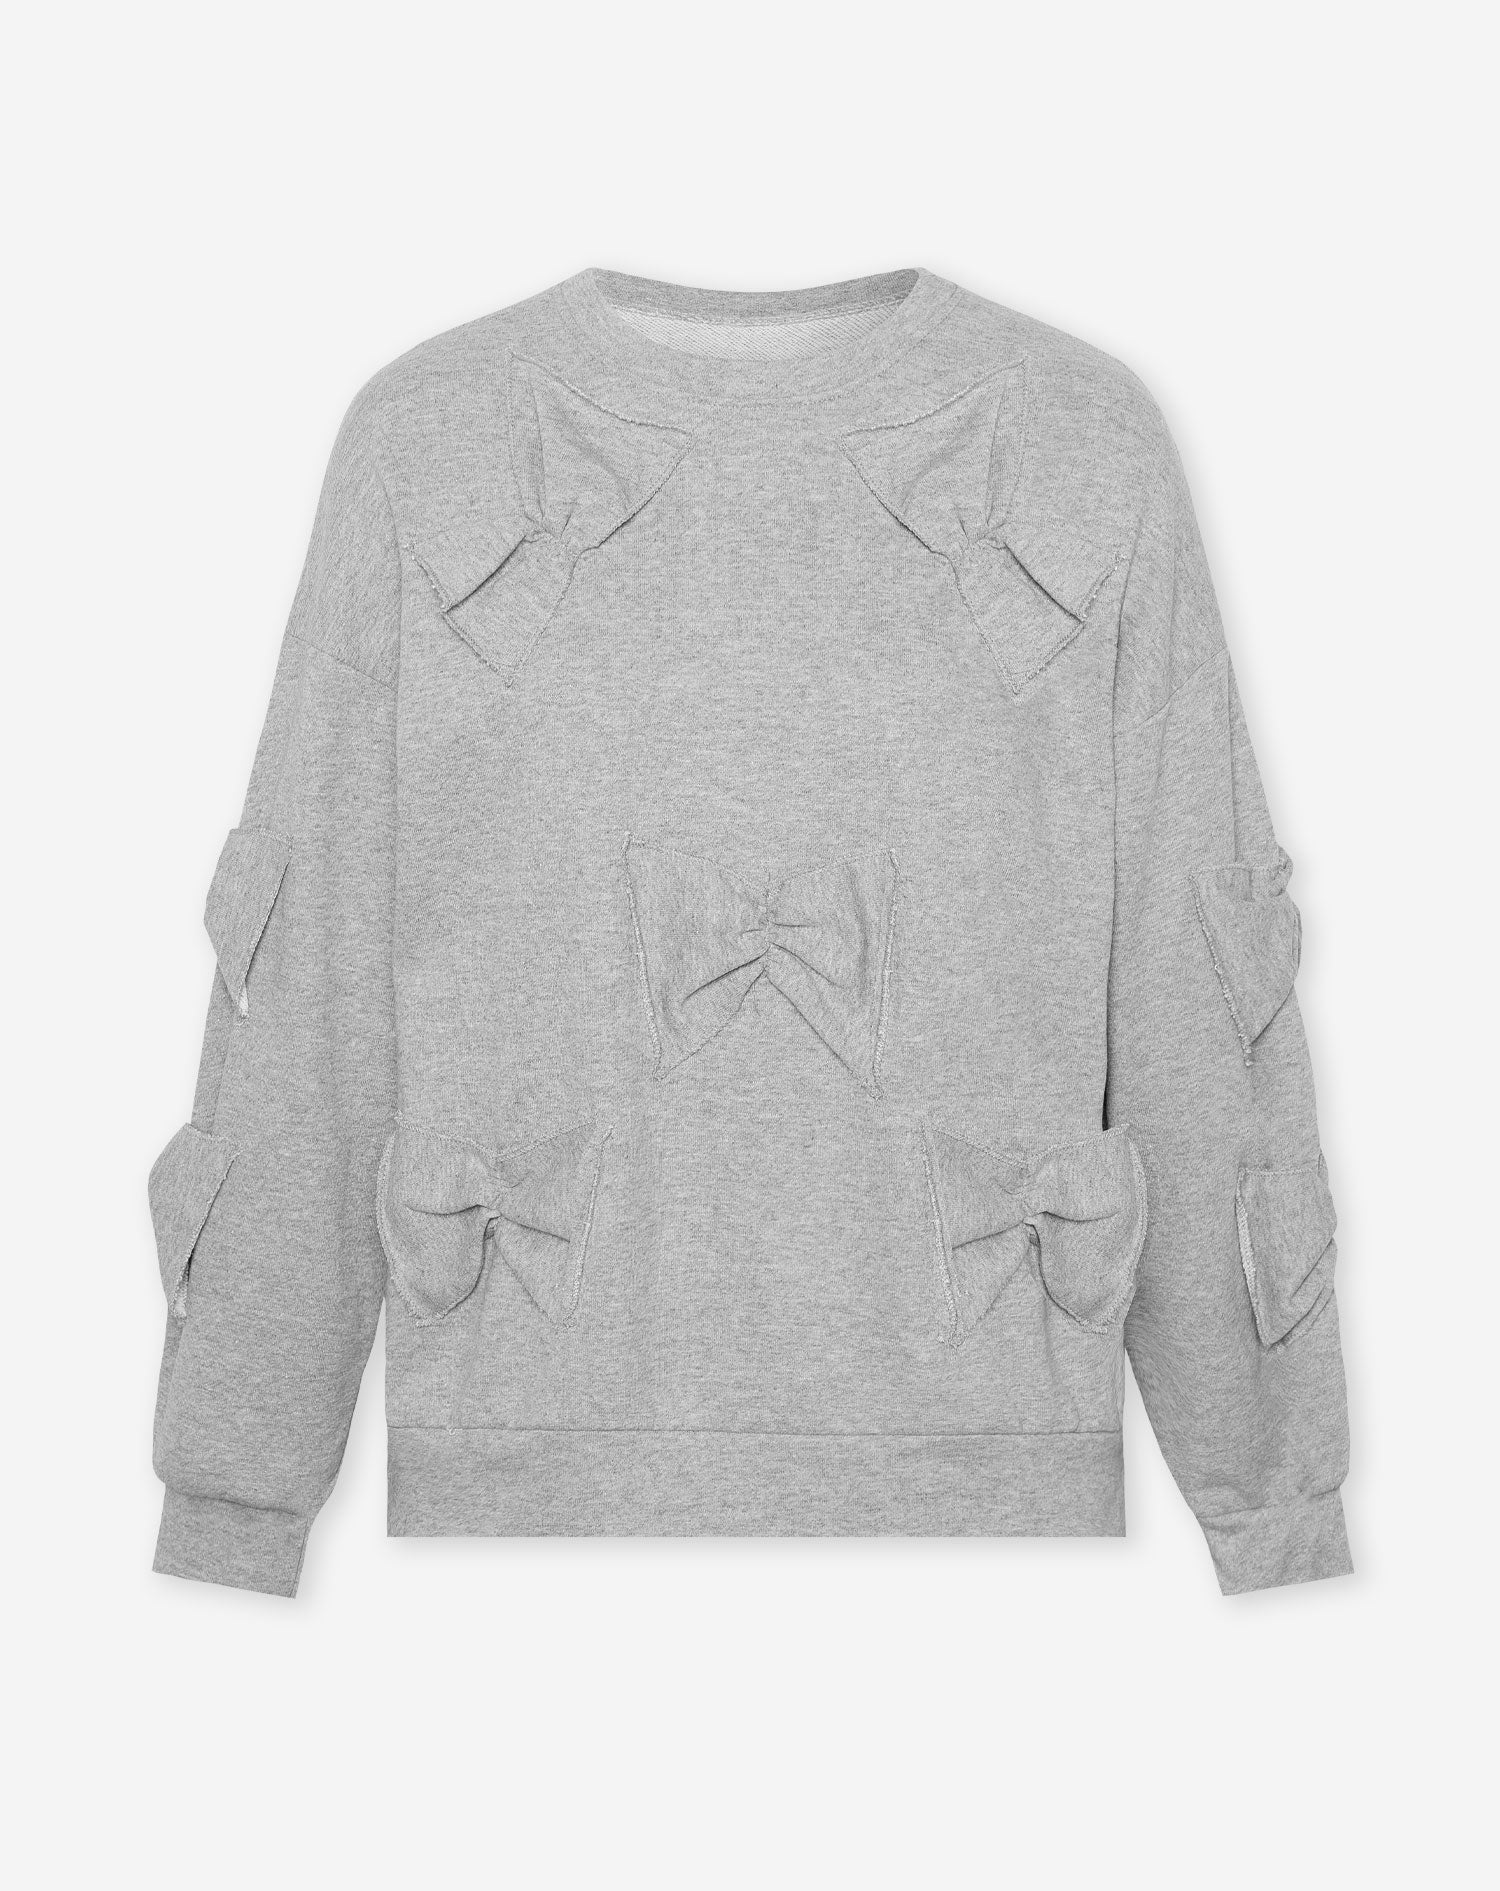 SMALL BOWS SWEATER GREY